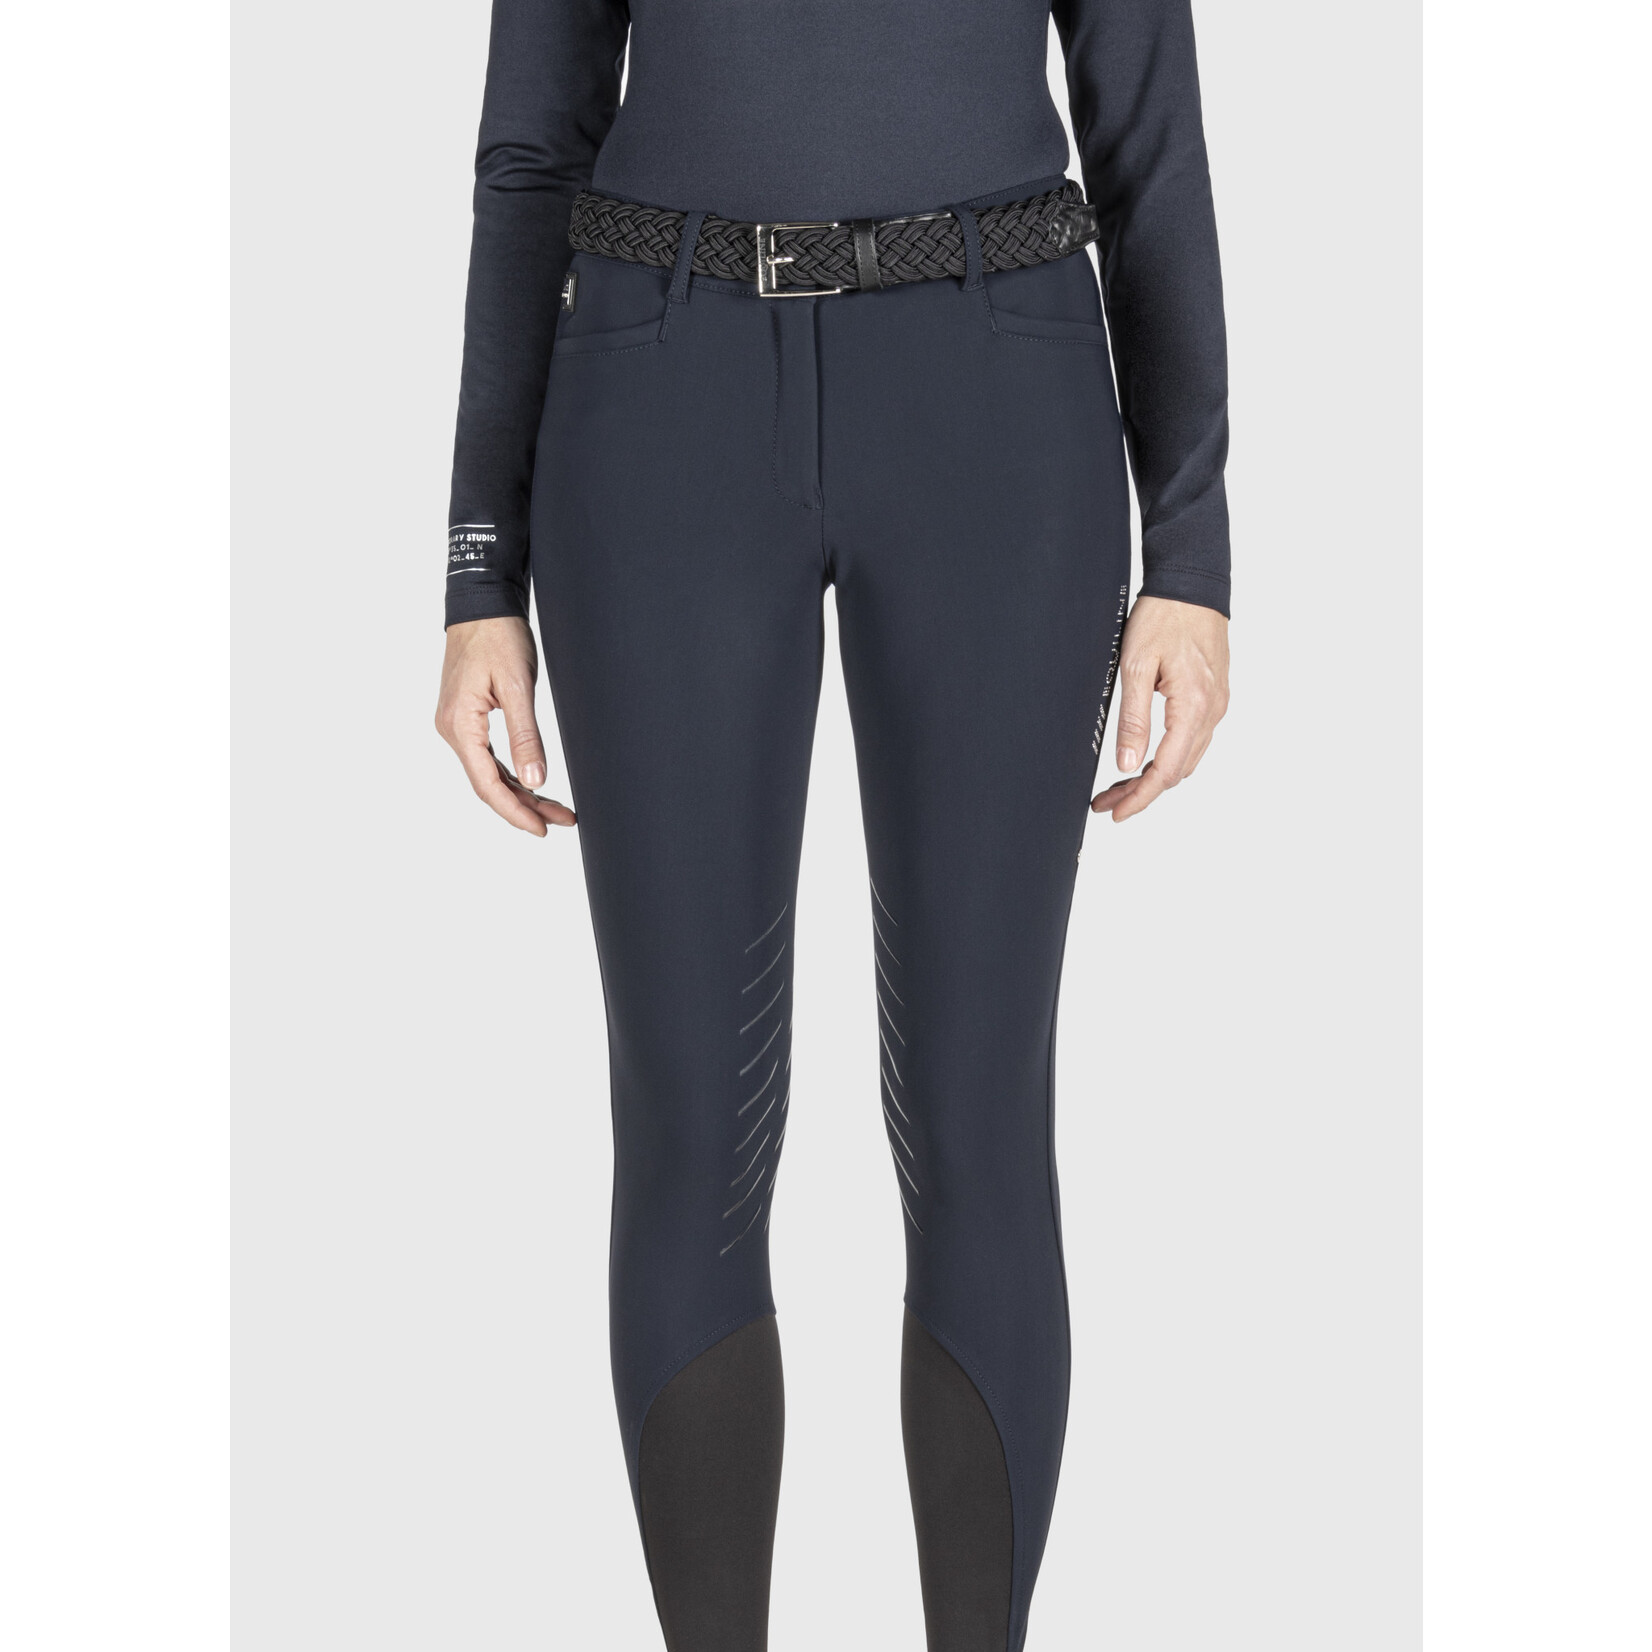 Equiline Equiline B-Ash Women's Knee Grip Breeches